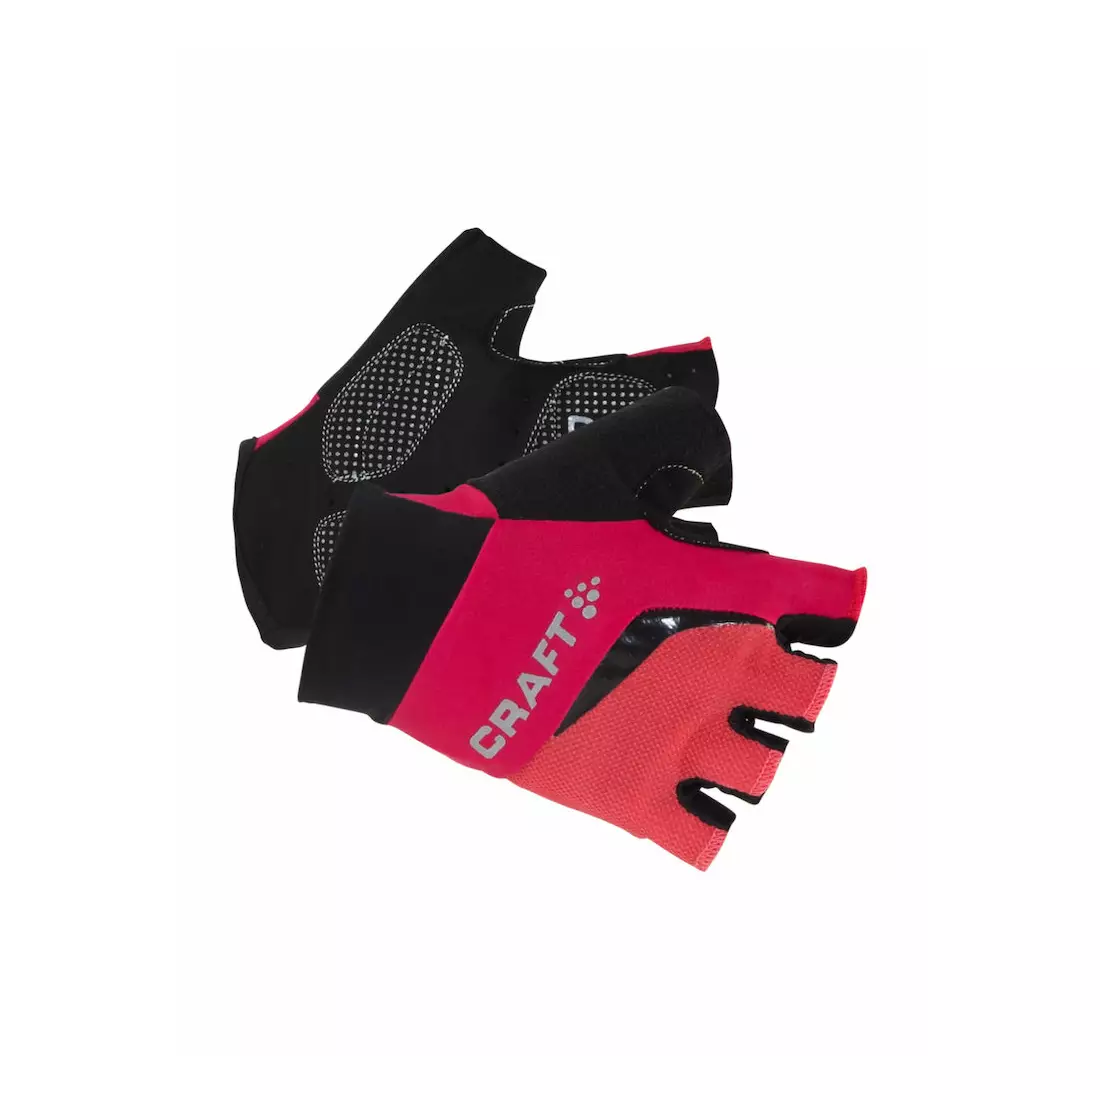 CRAFT CLASSIC GLOVE 1903305-2411 - women's cycling gloves